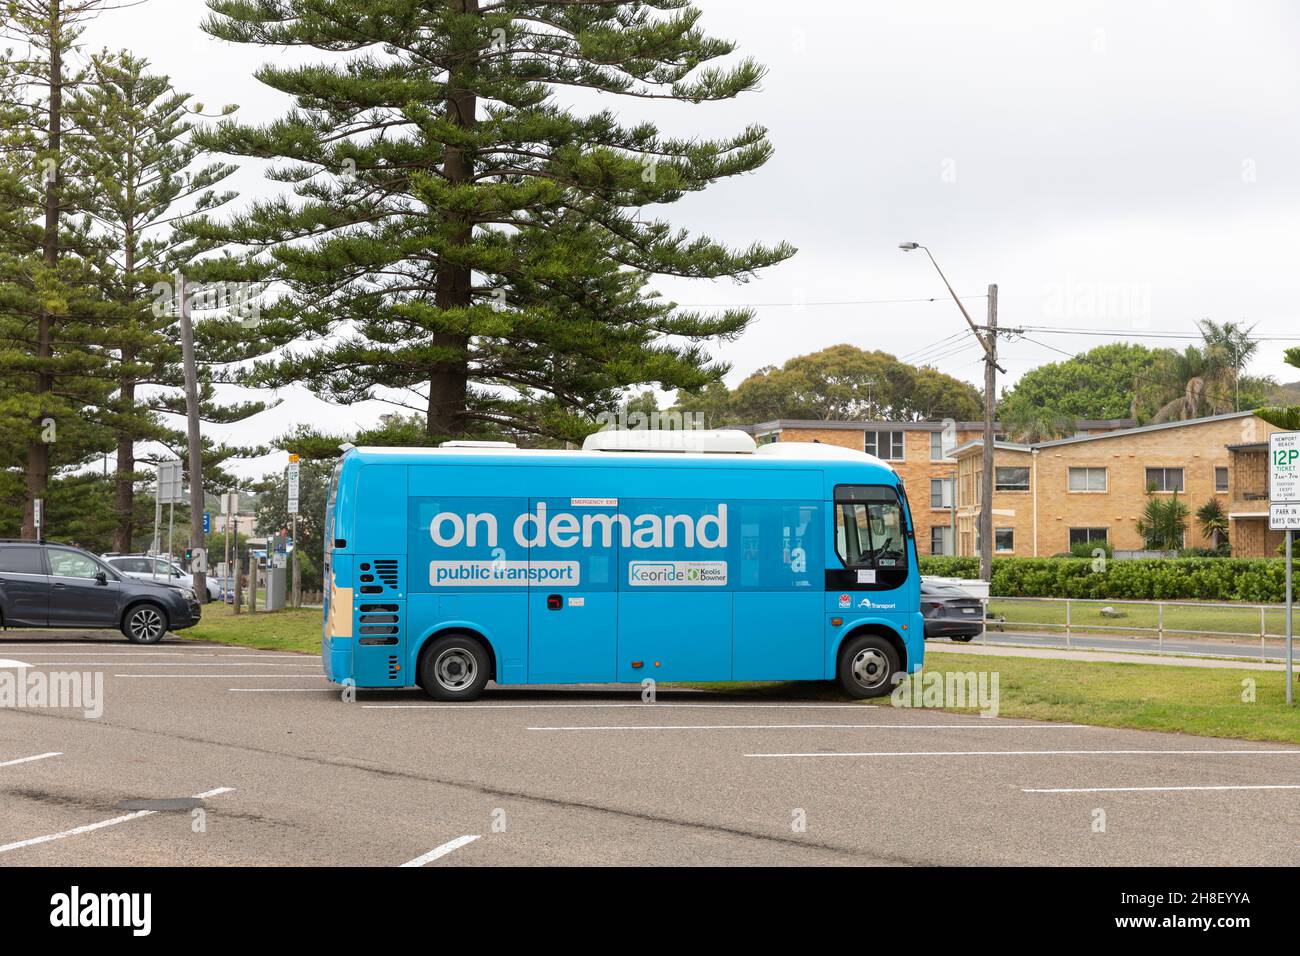 On demand public transport in Sydney northern beaches region, designed to improve connectivity for local community,Sydney,Australia Stock Photo